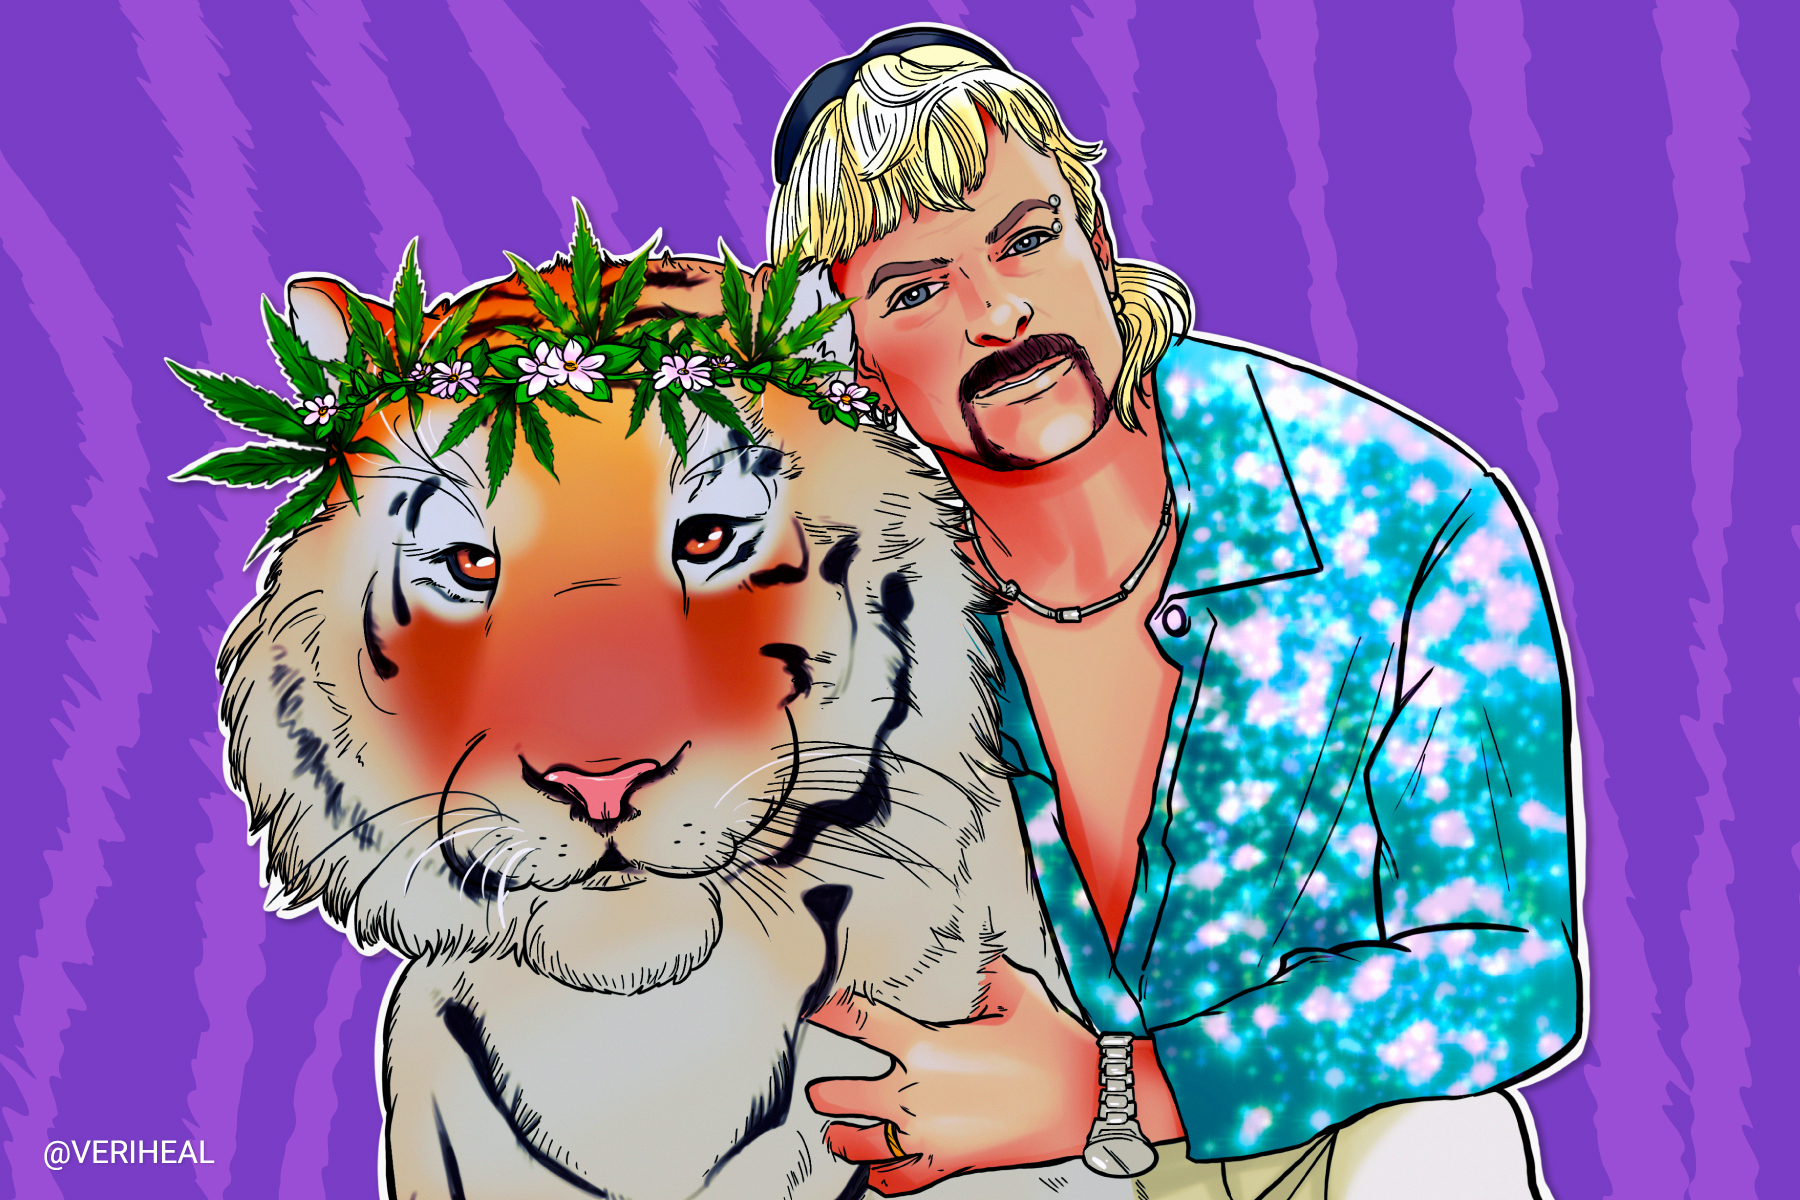 Joe Exotic is Releasing His Own Cannabis Brand Out of Prison